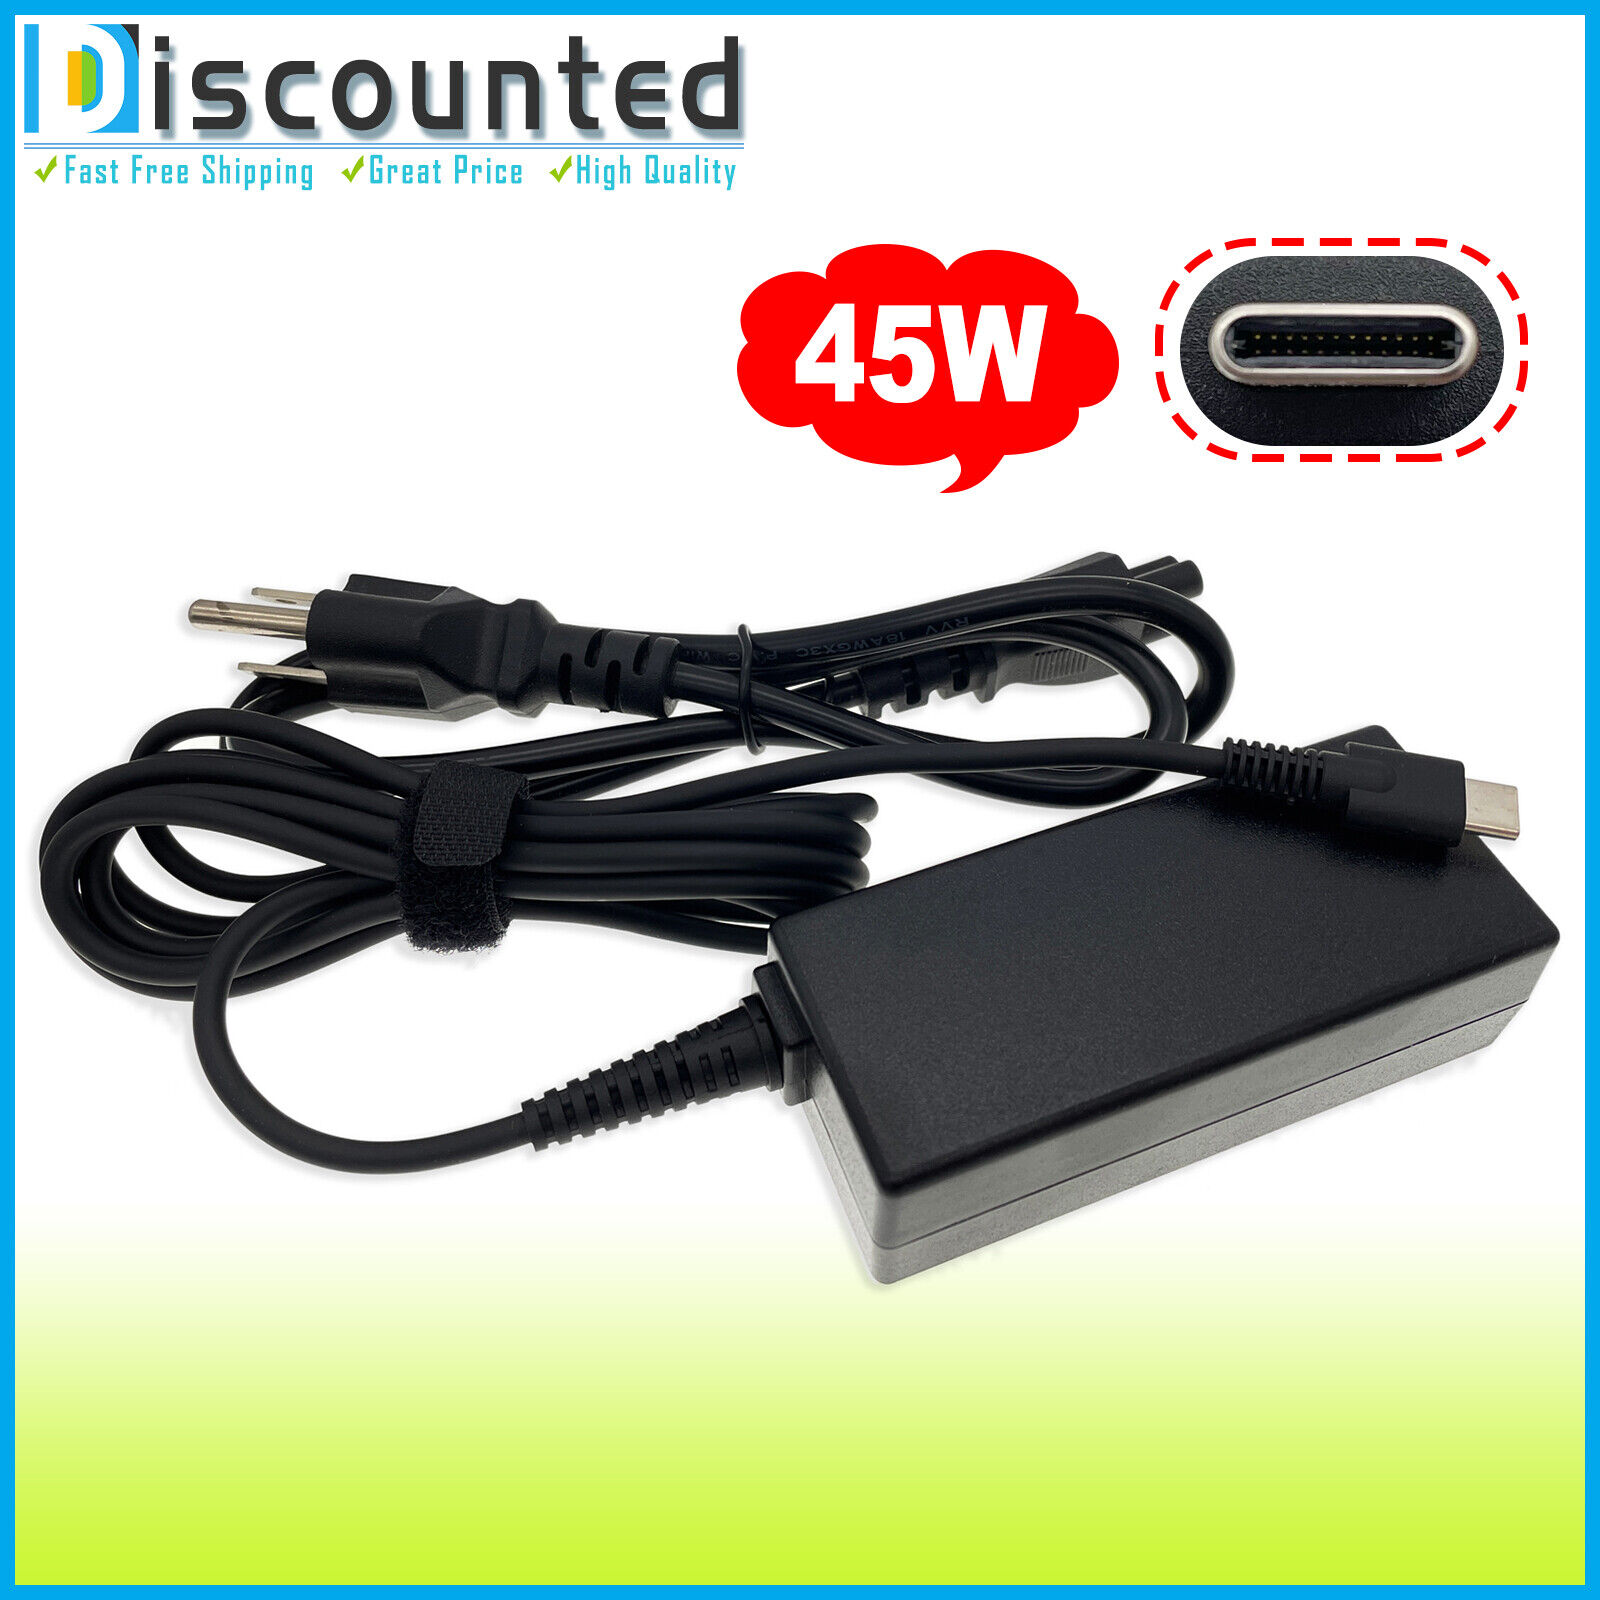 45W USB-C AC Adapter For Lenovo 14w 81MQ000JUS Laptop Charger Power Supply Cord